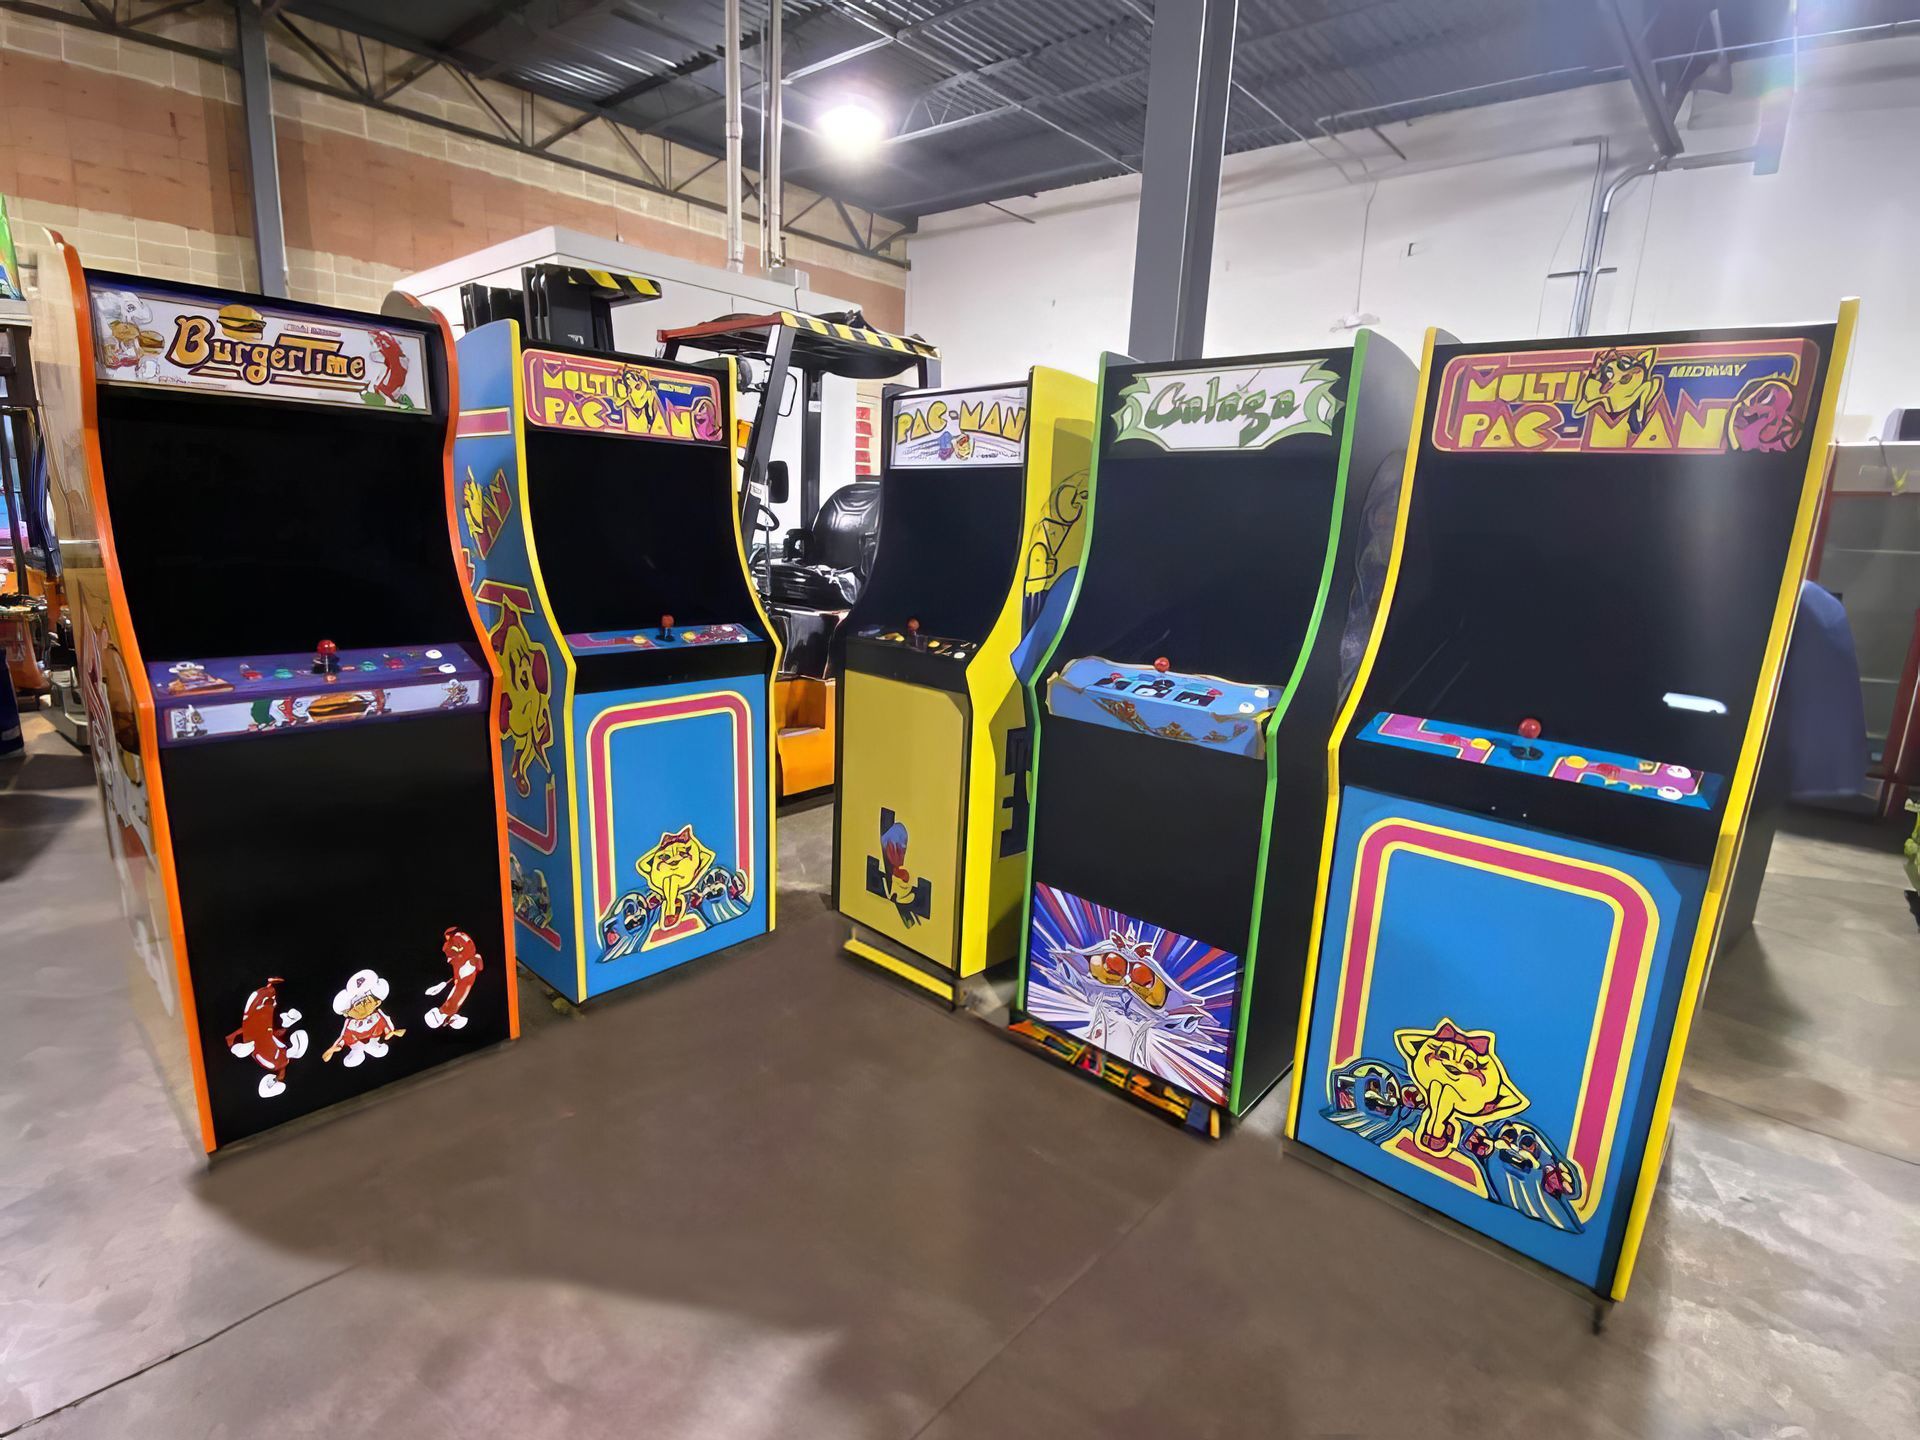 A row of arcade machines are lined up in a warehouse.